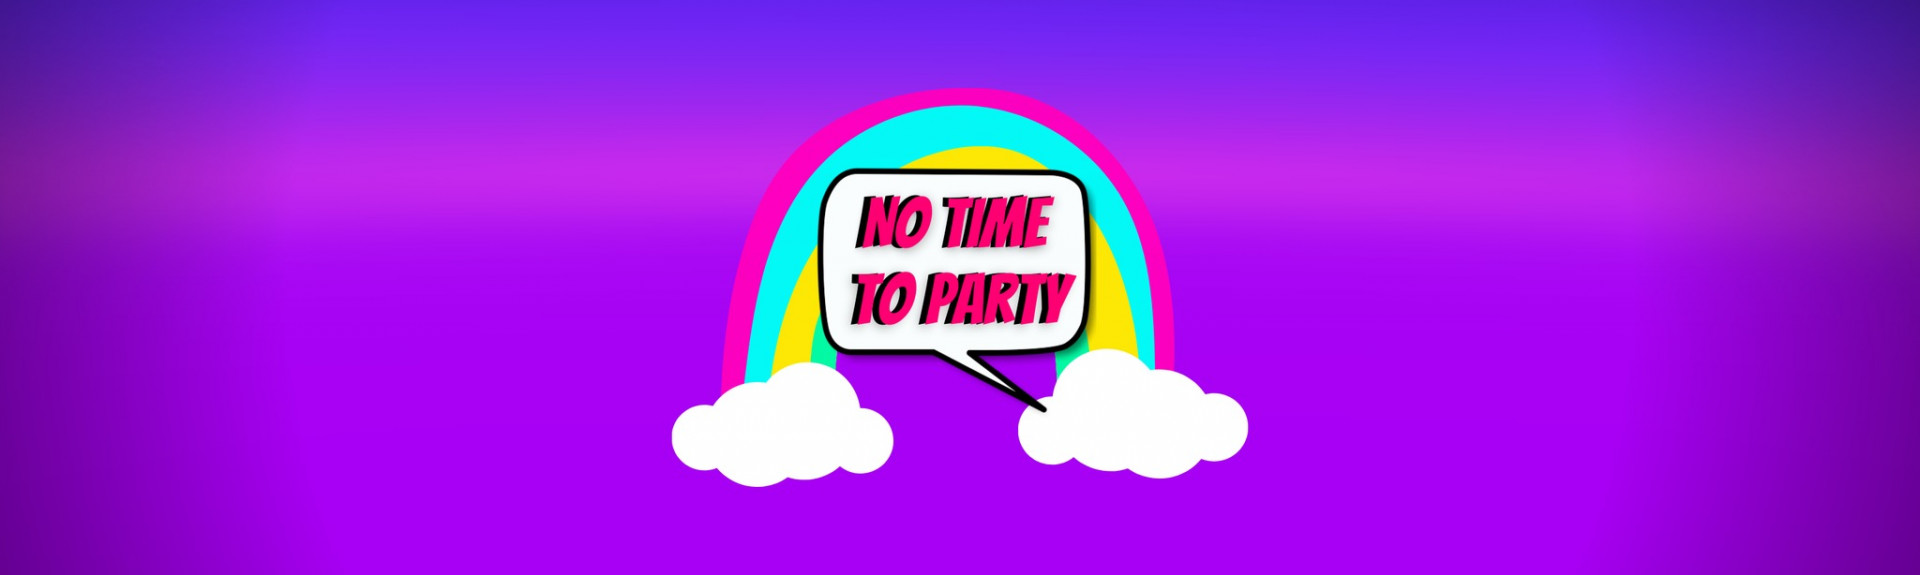 NO TIME TO PARTY